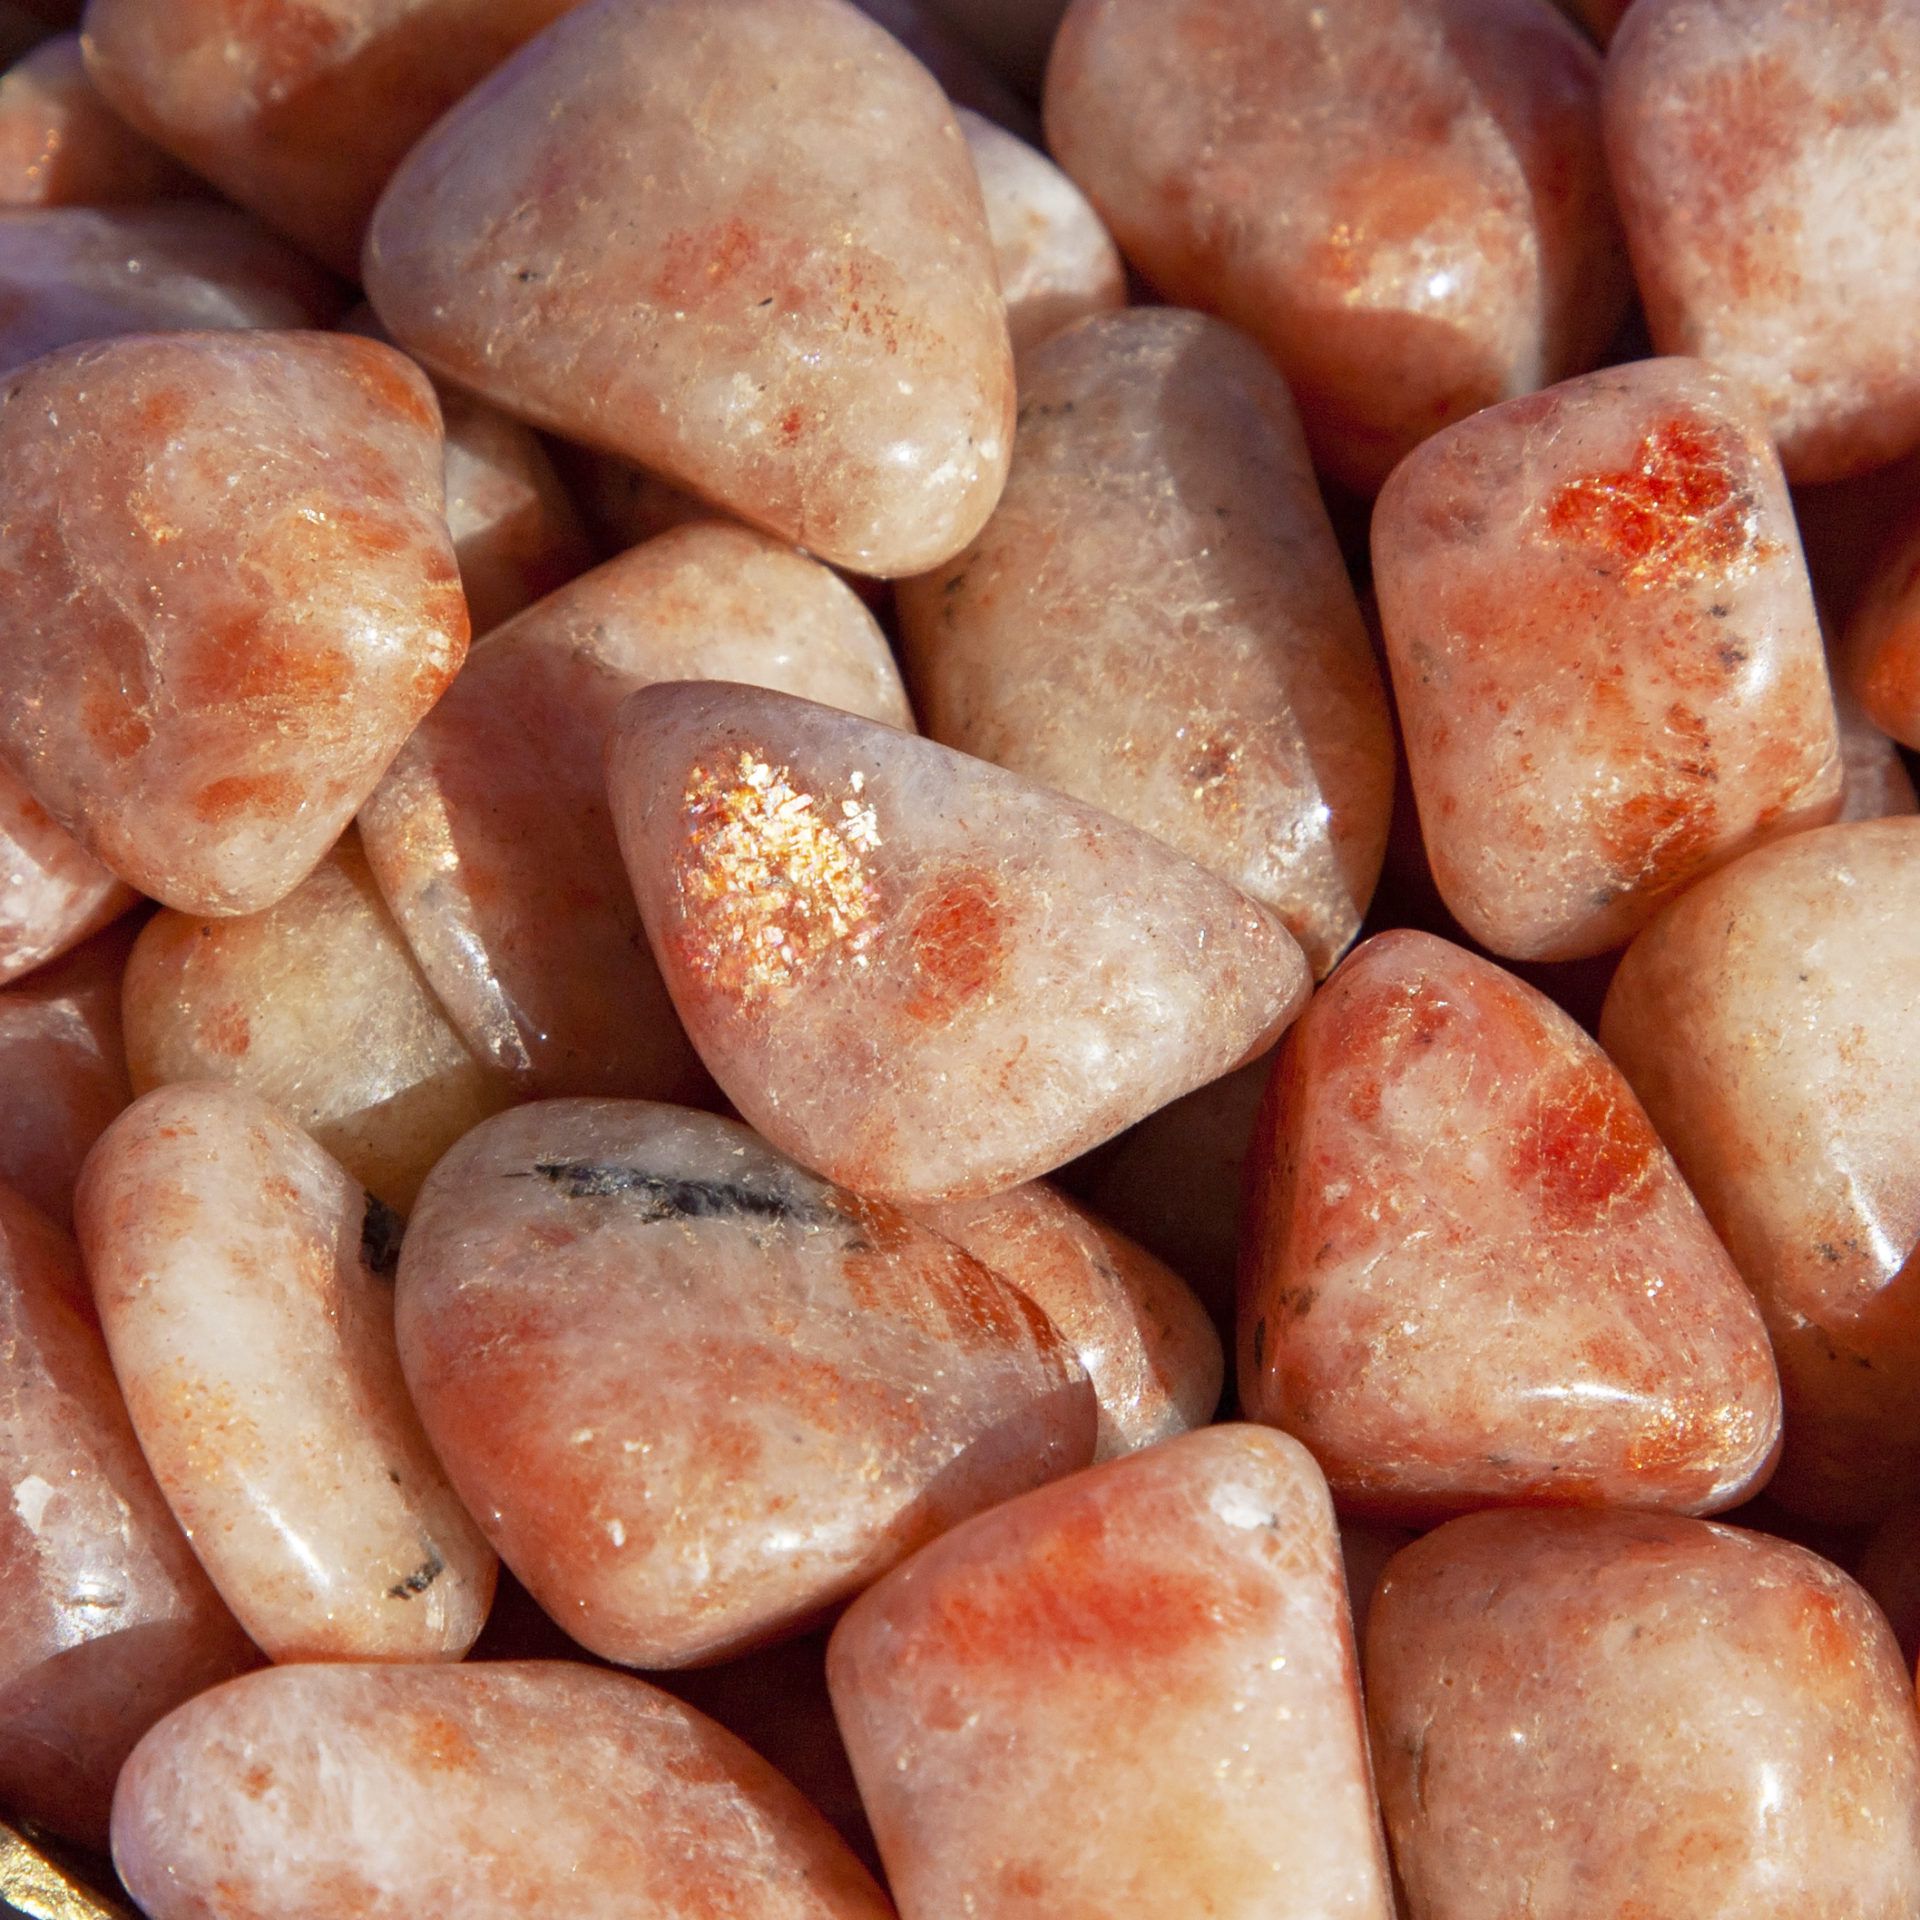 What is sunstone?